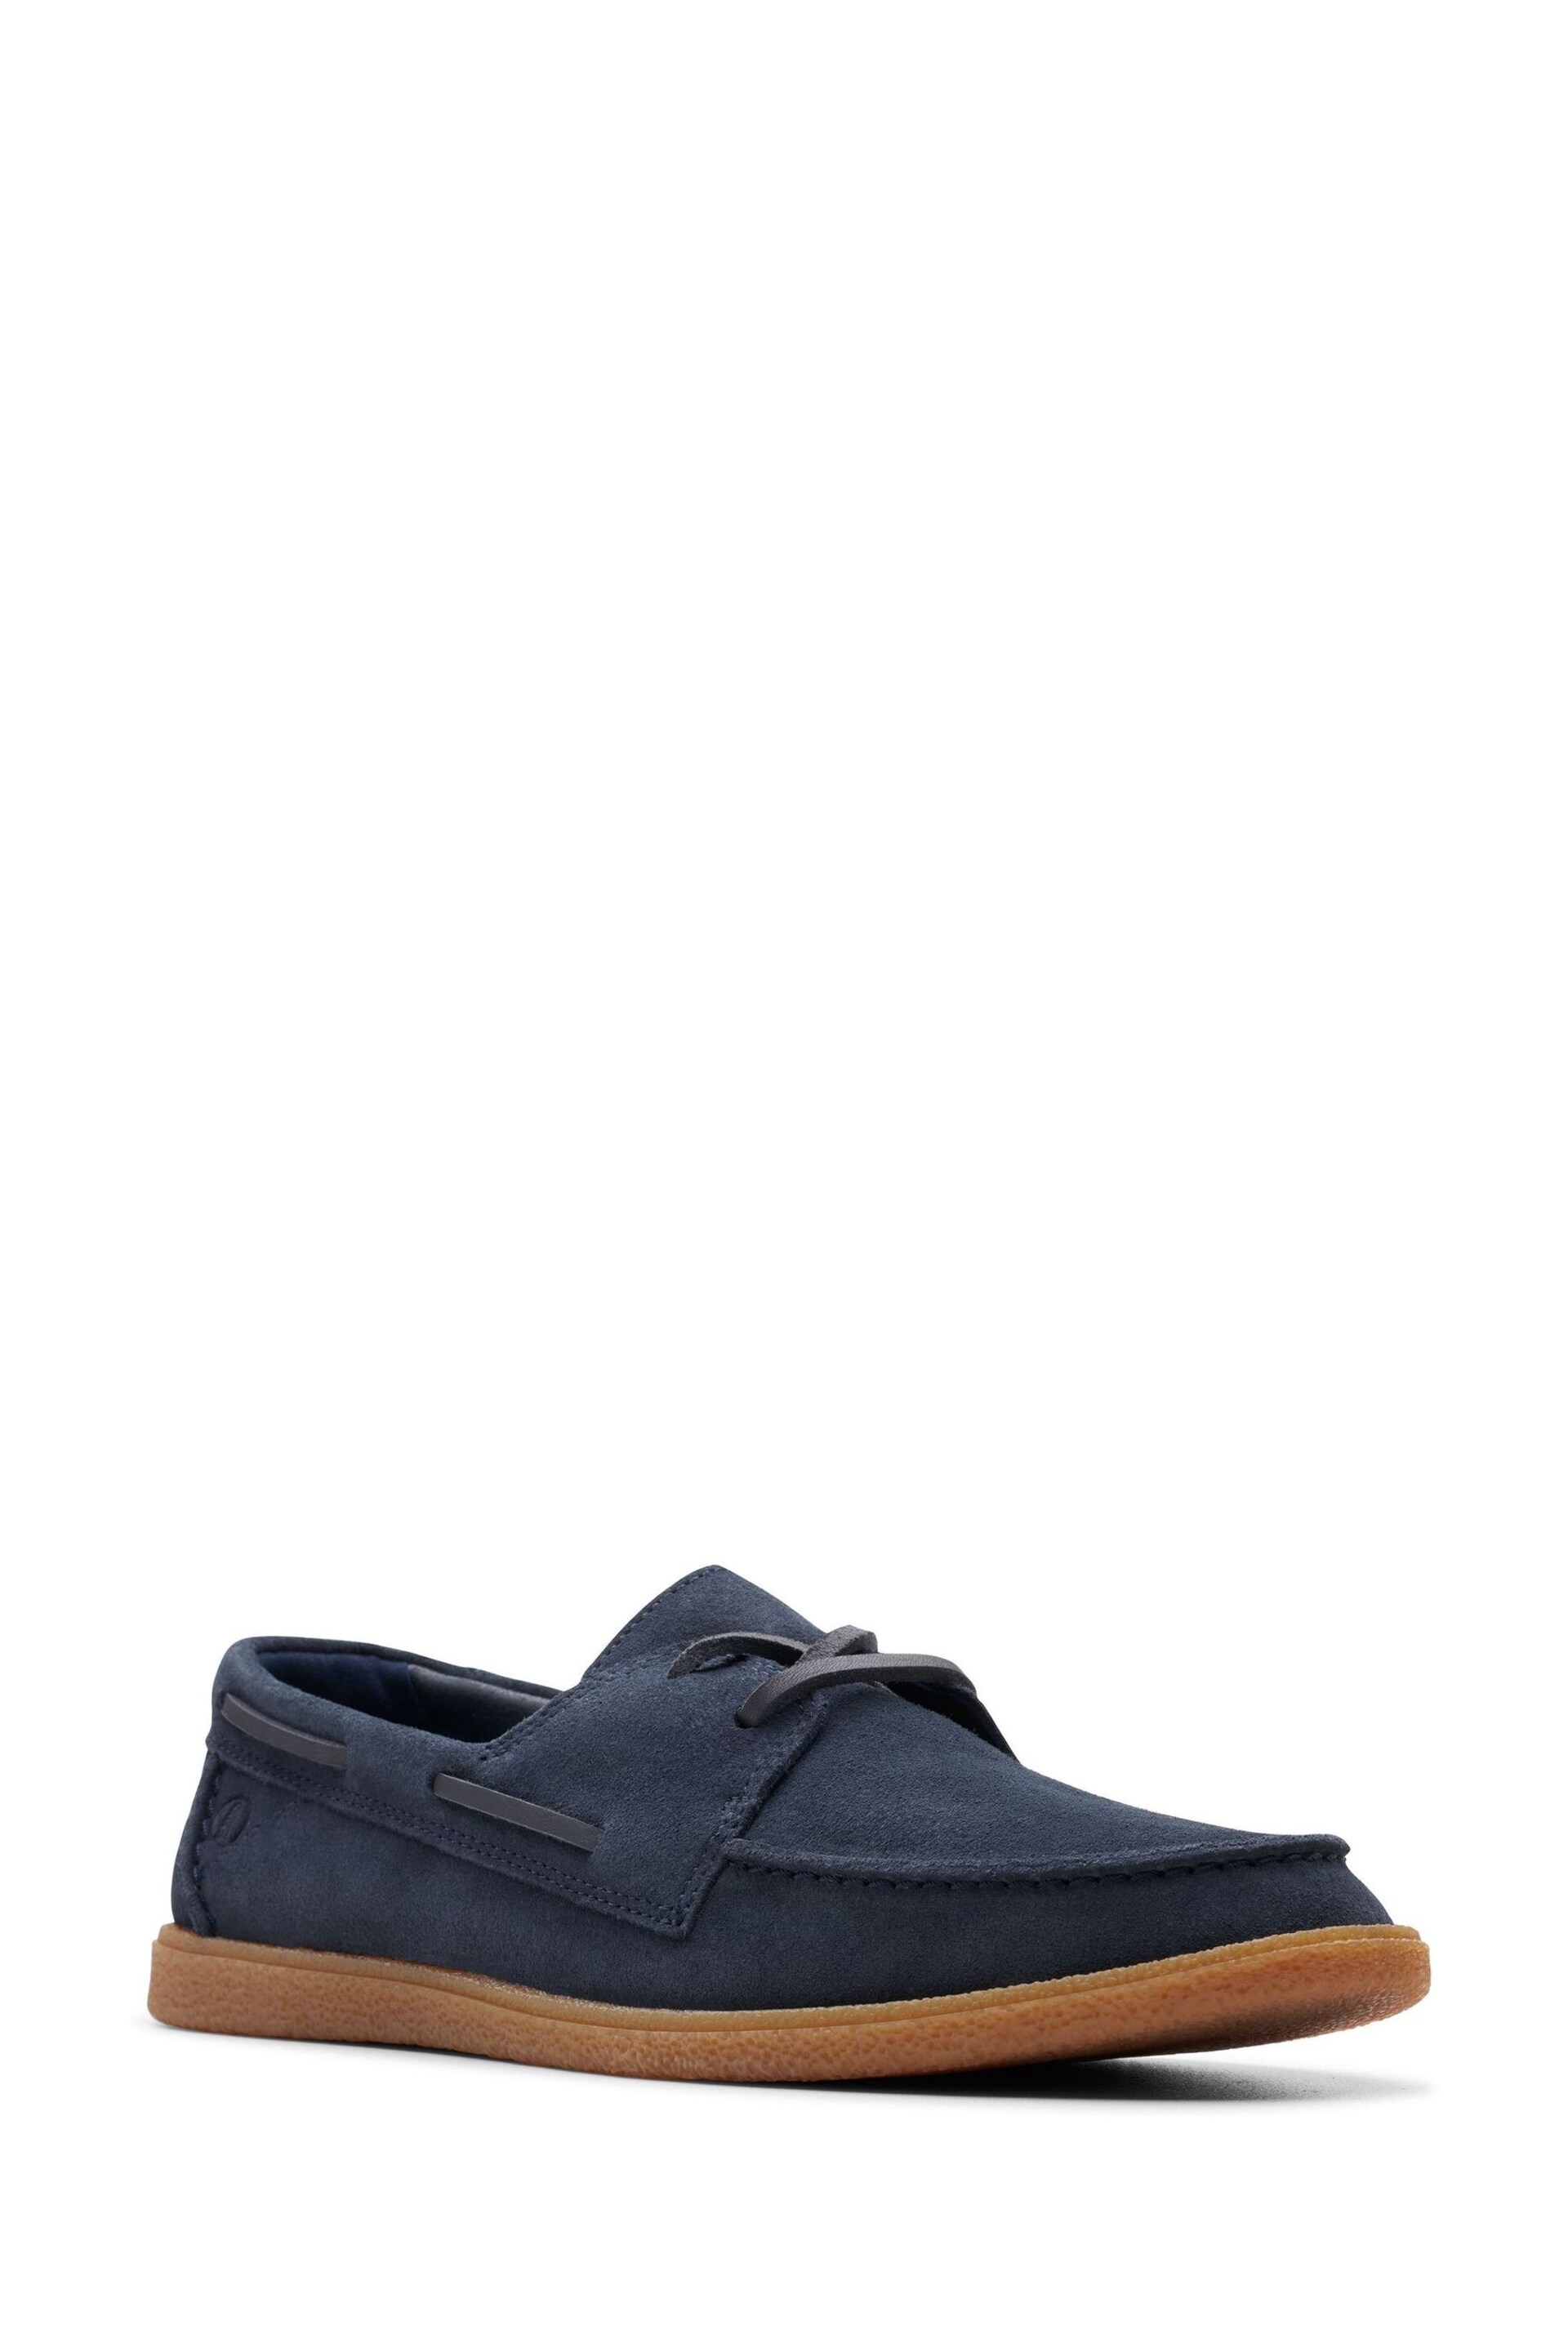 Clarks Blue Suede Clarkbay Go Shoes - Image 2 of 6